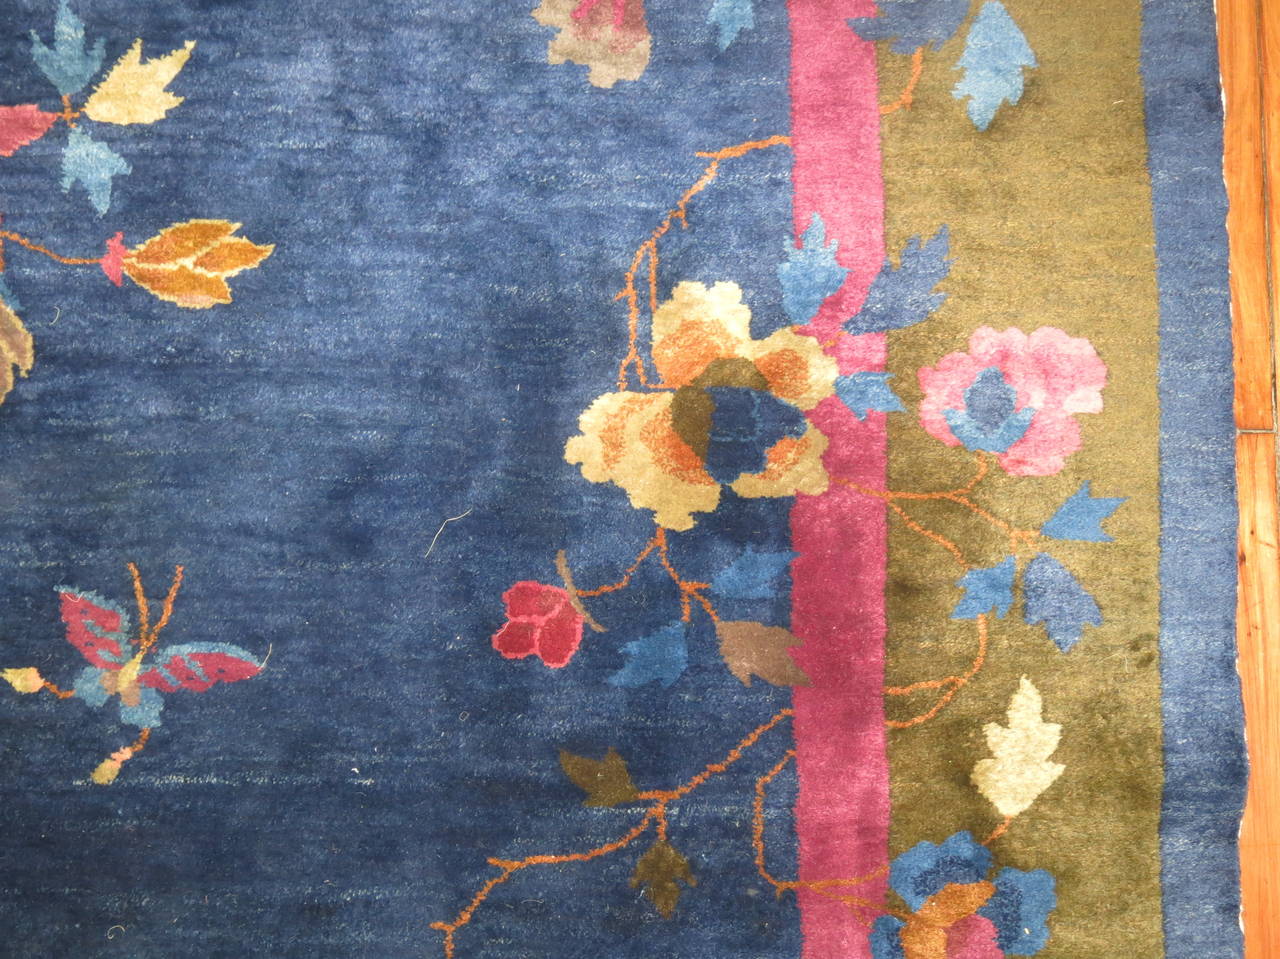 A pristine Chinese Art Deco rug in lovely blues and pinks. Even Full pile excellent condition